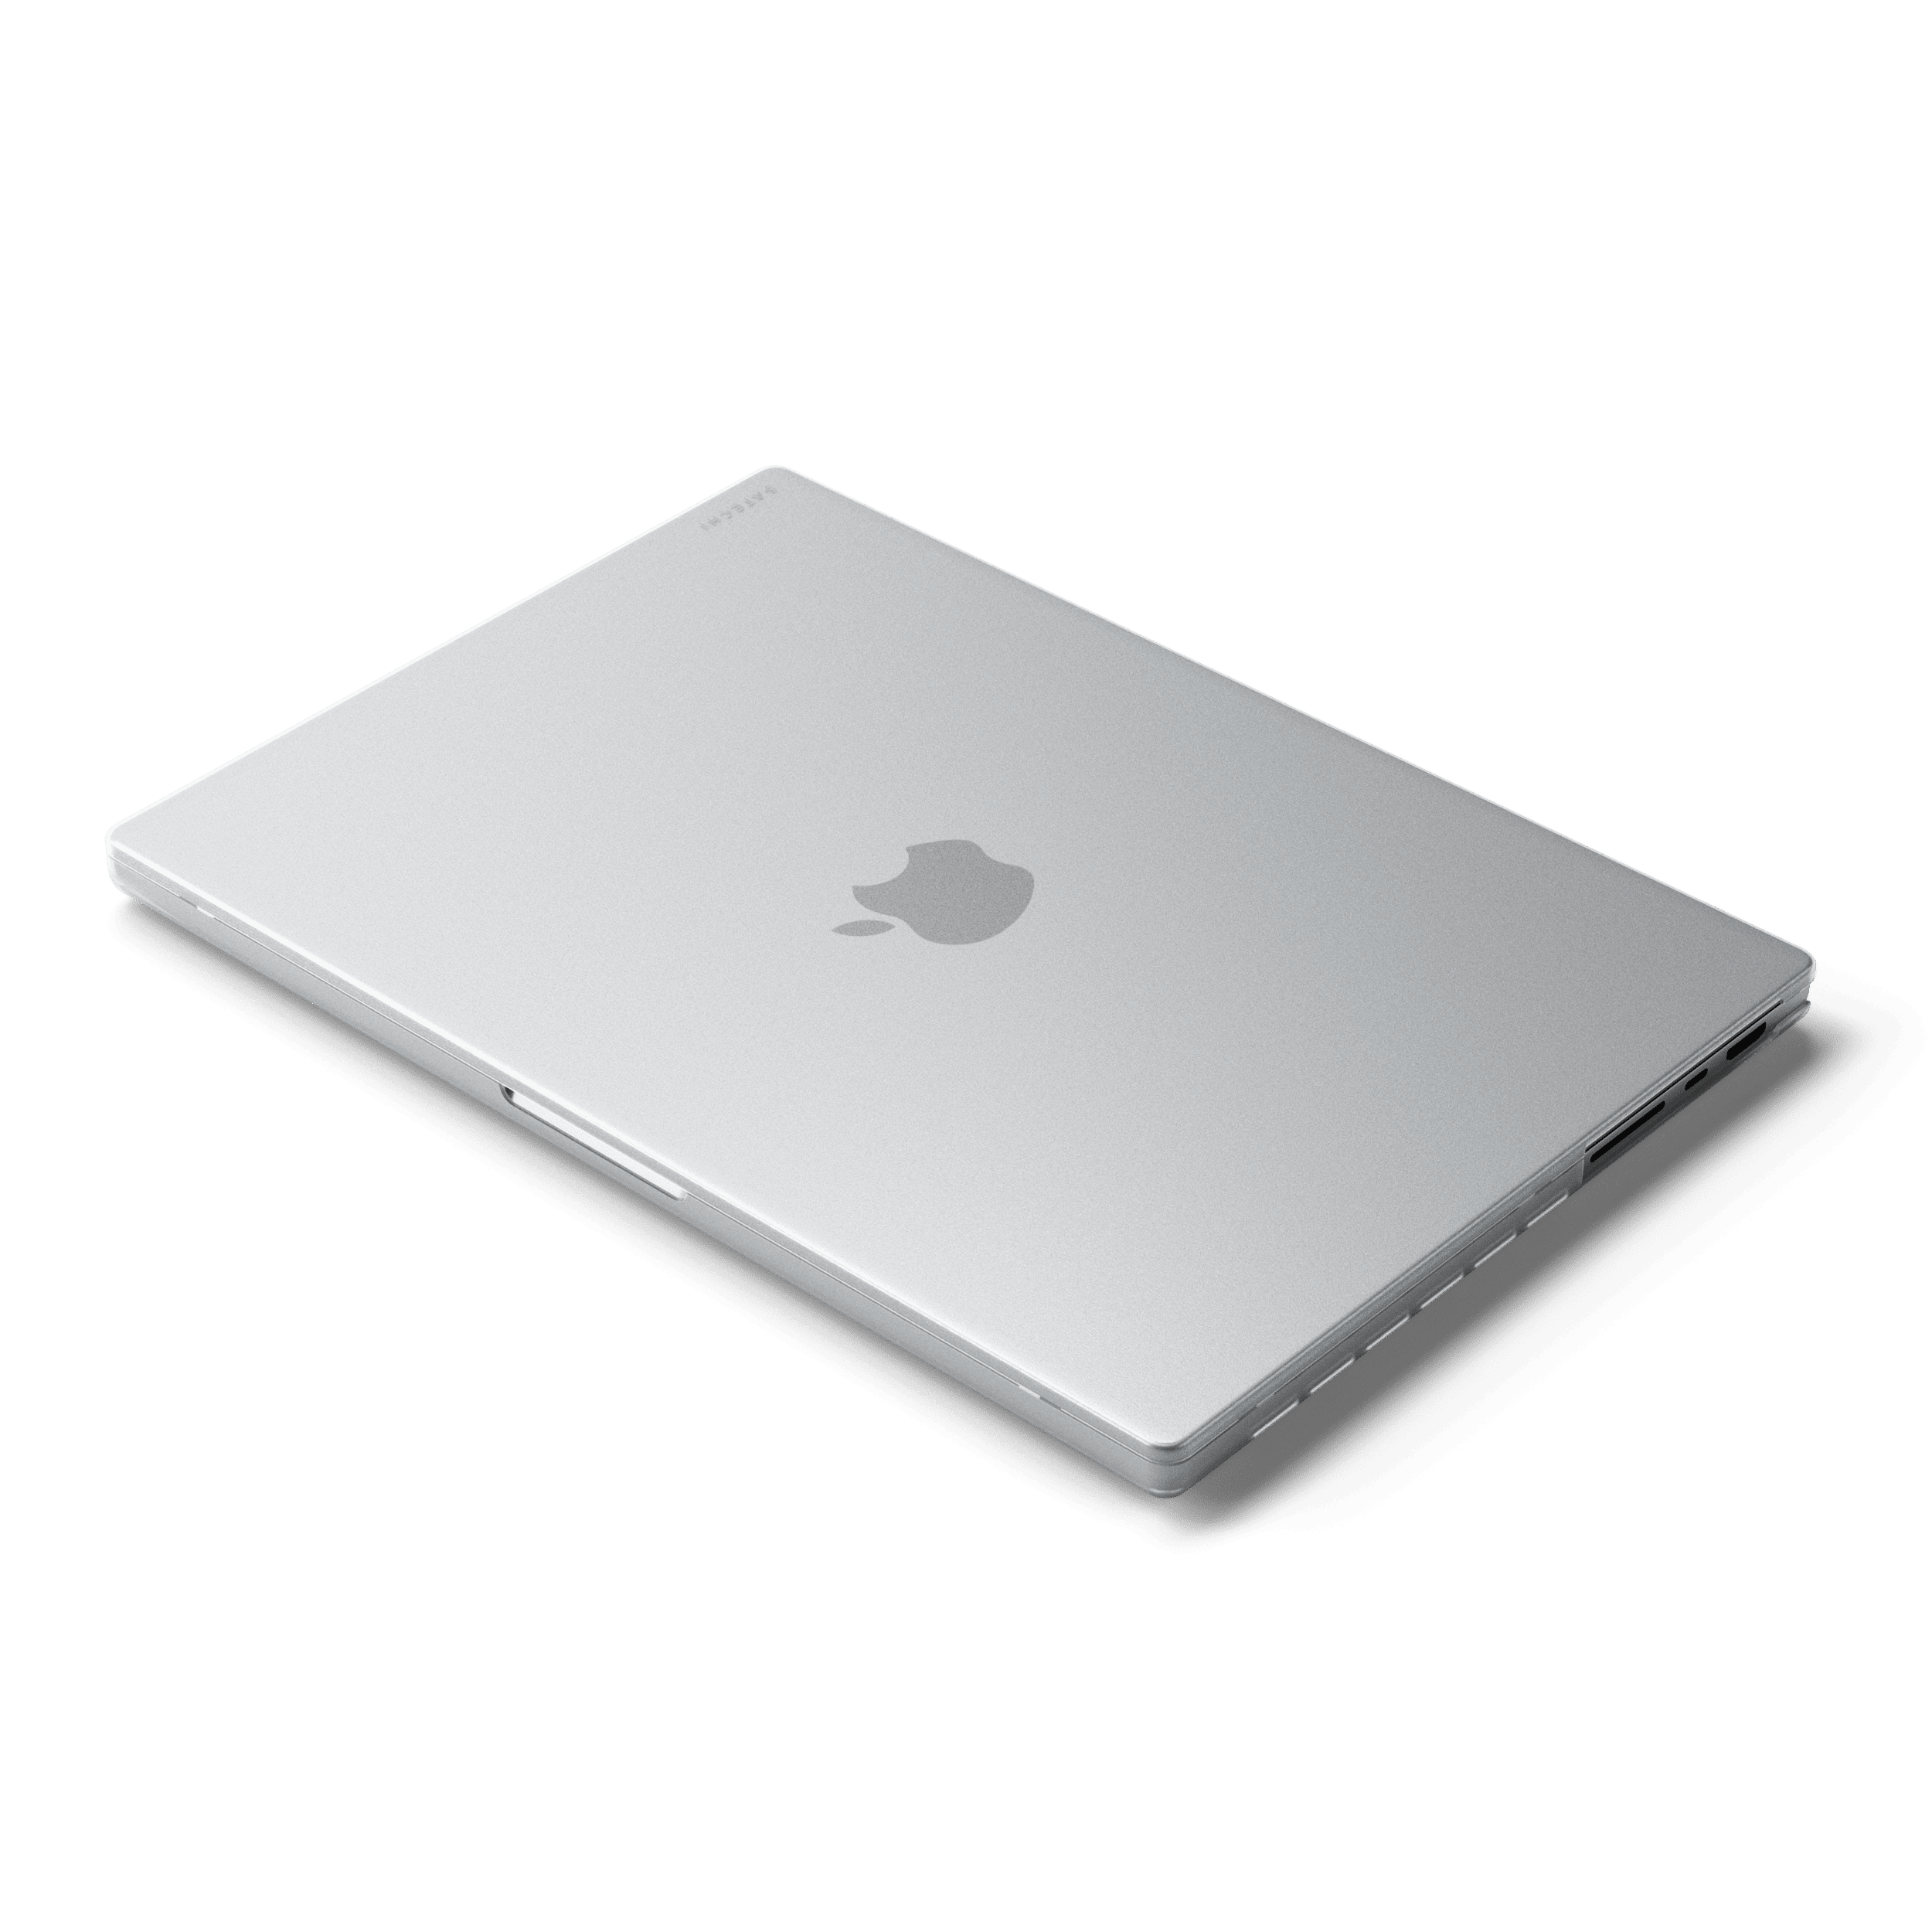 https://cdn.shopify.com/s/files/1/1520/4366/products/eco-hardshell-case-for-macbook-pro-accessories-satechi-156962.png?v=1674968183